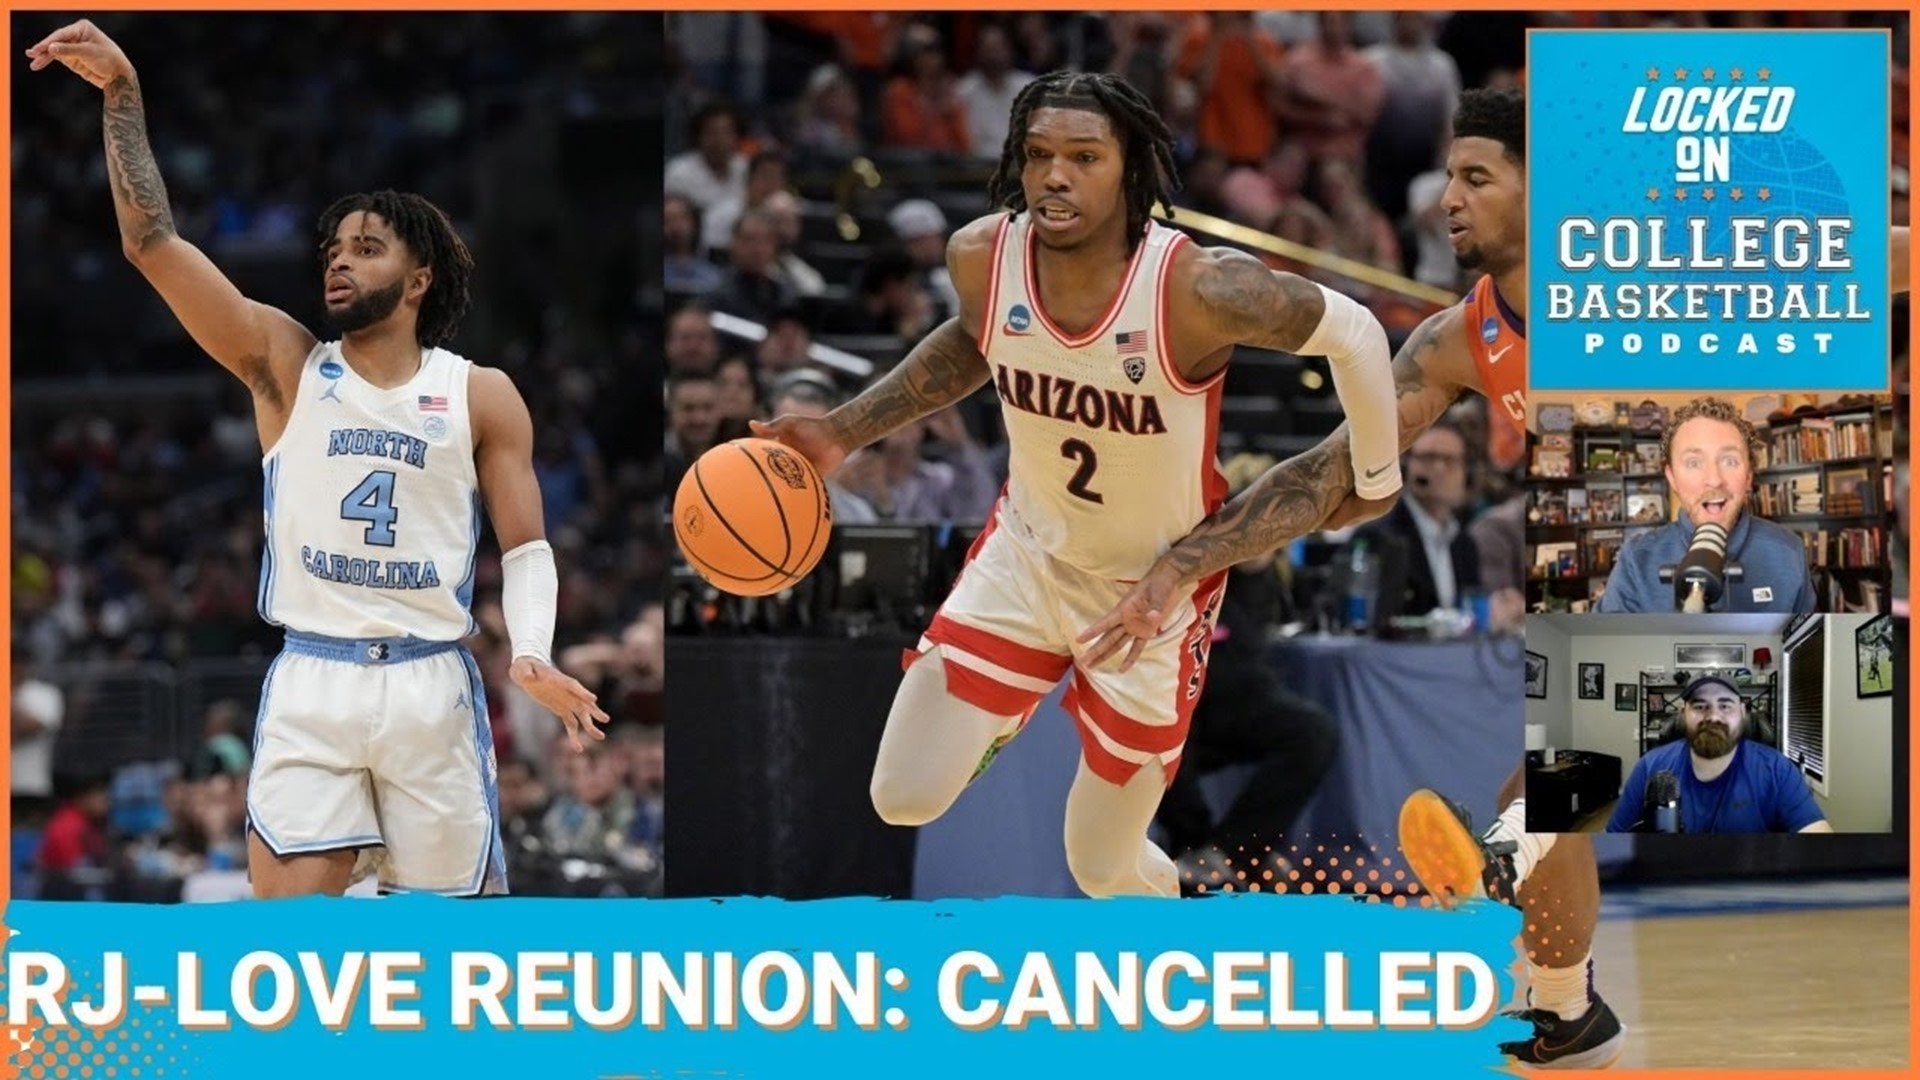 The RJ Davis and Caleb Love reunion is not in the cards as both North Carolina and Arizona fell on Thursday in the Sweet 16.